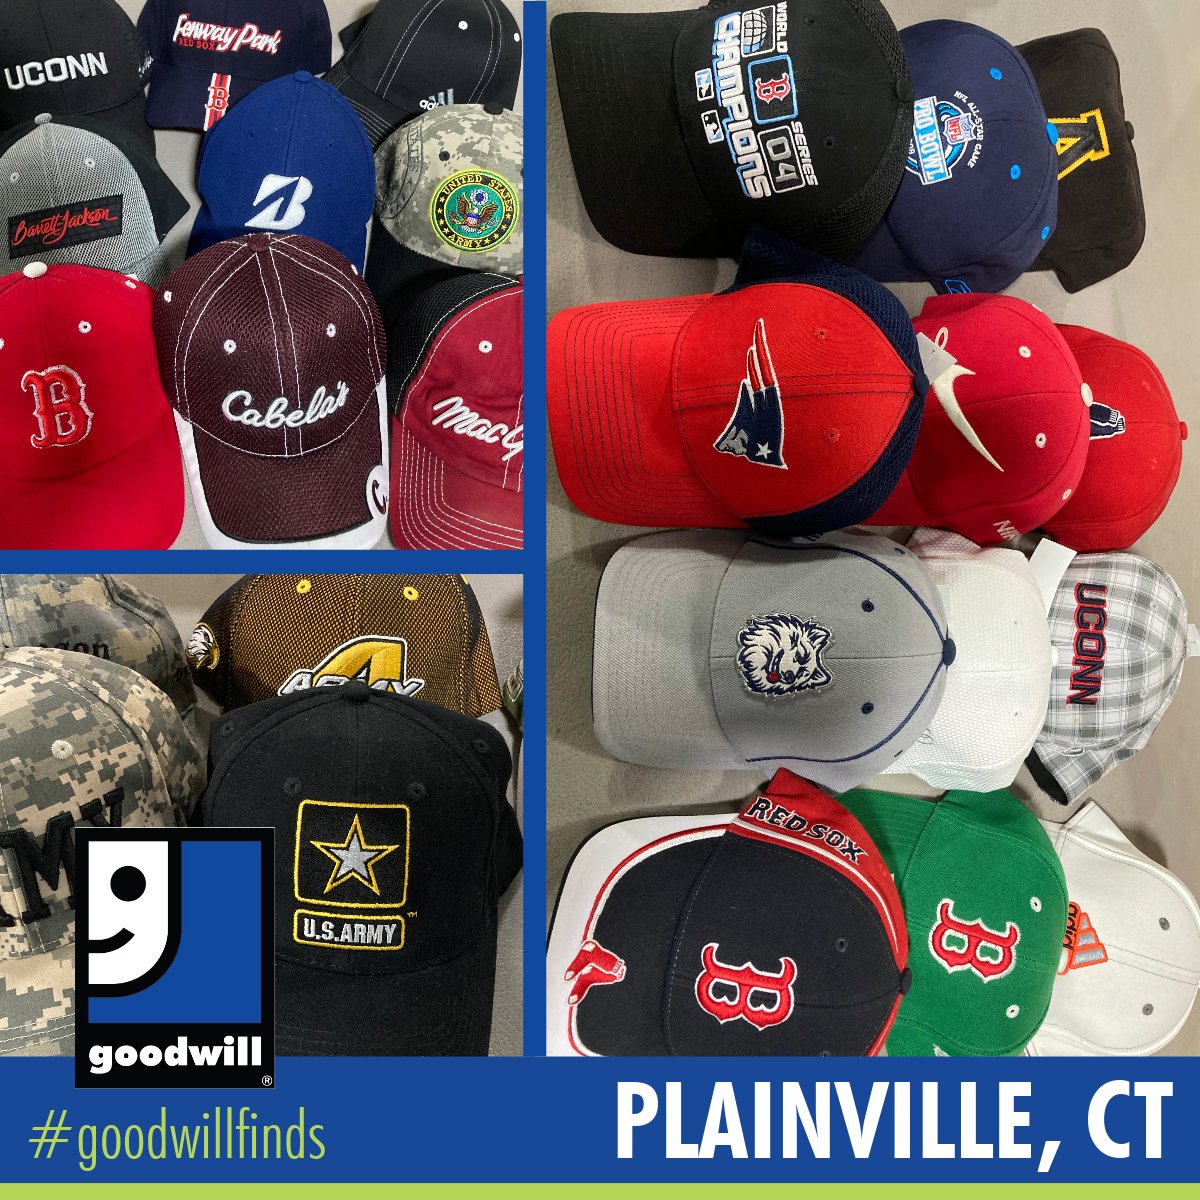 We have an awesome selection of brand-new hats in our Plainville, CT store at $5.99 each! Check them out before they are gone! #goodwillsne #goodwill #shopping #thrift #plainvillect